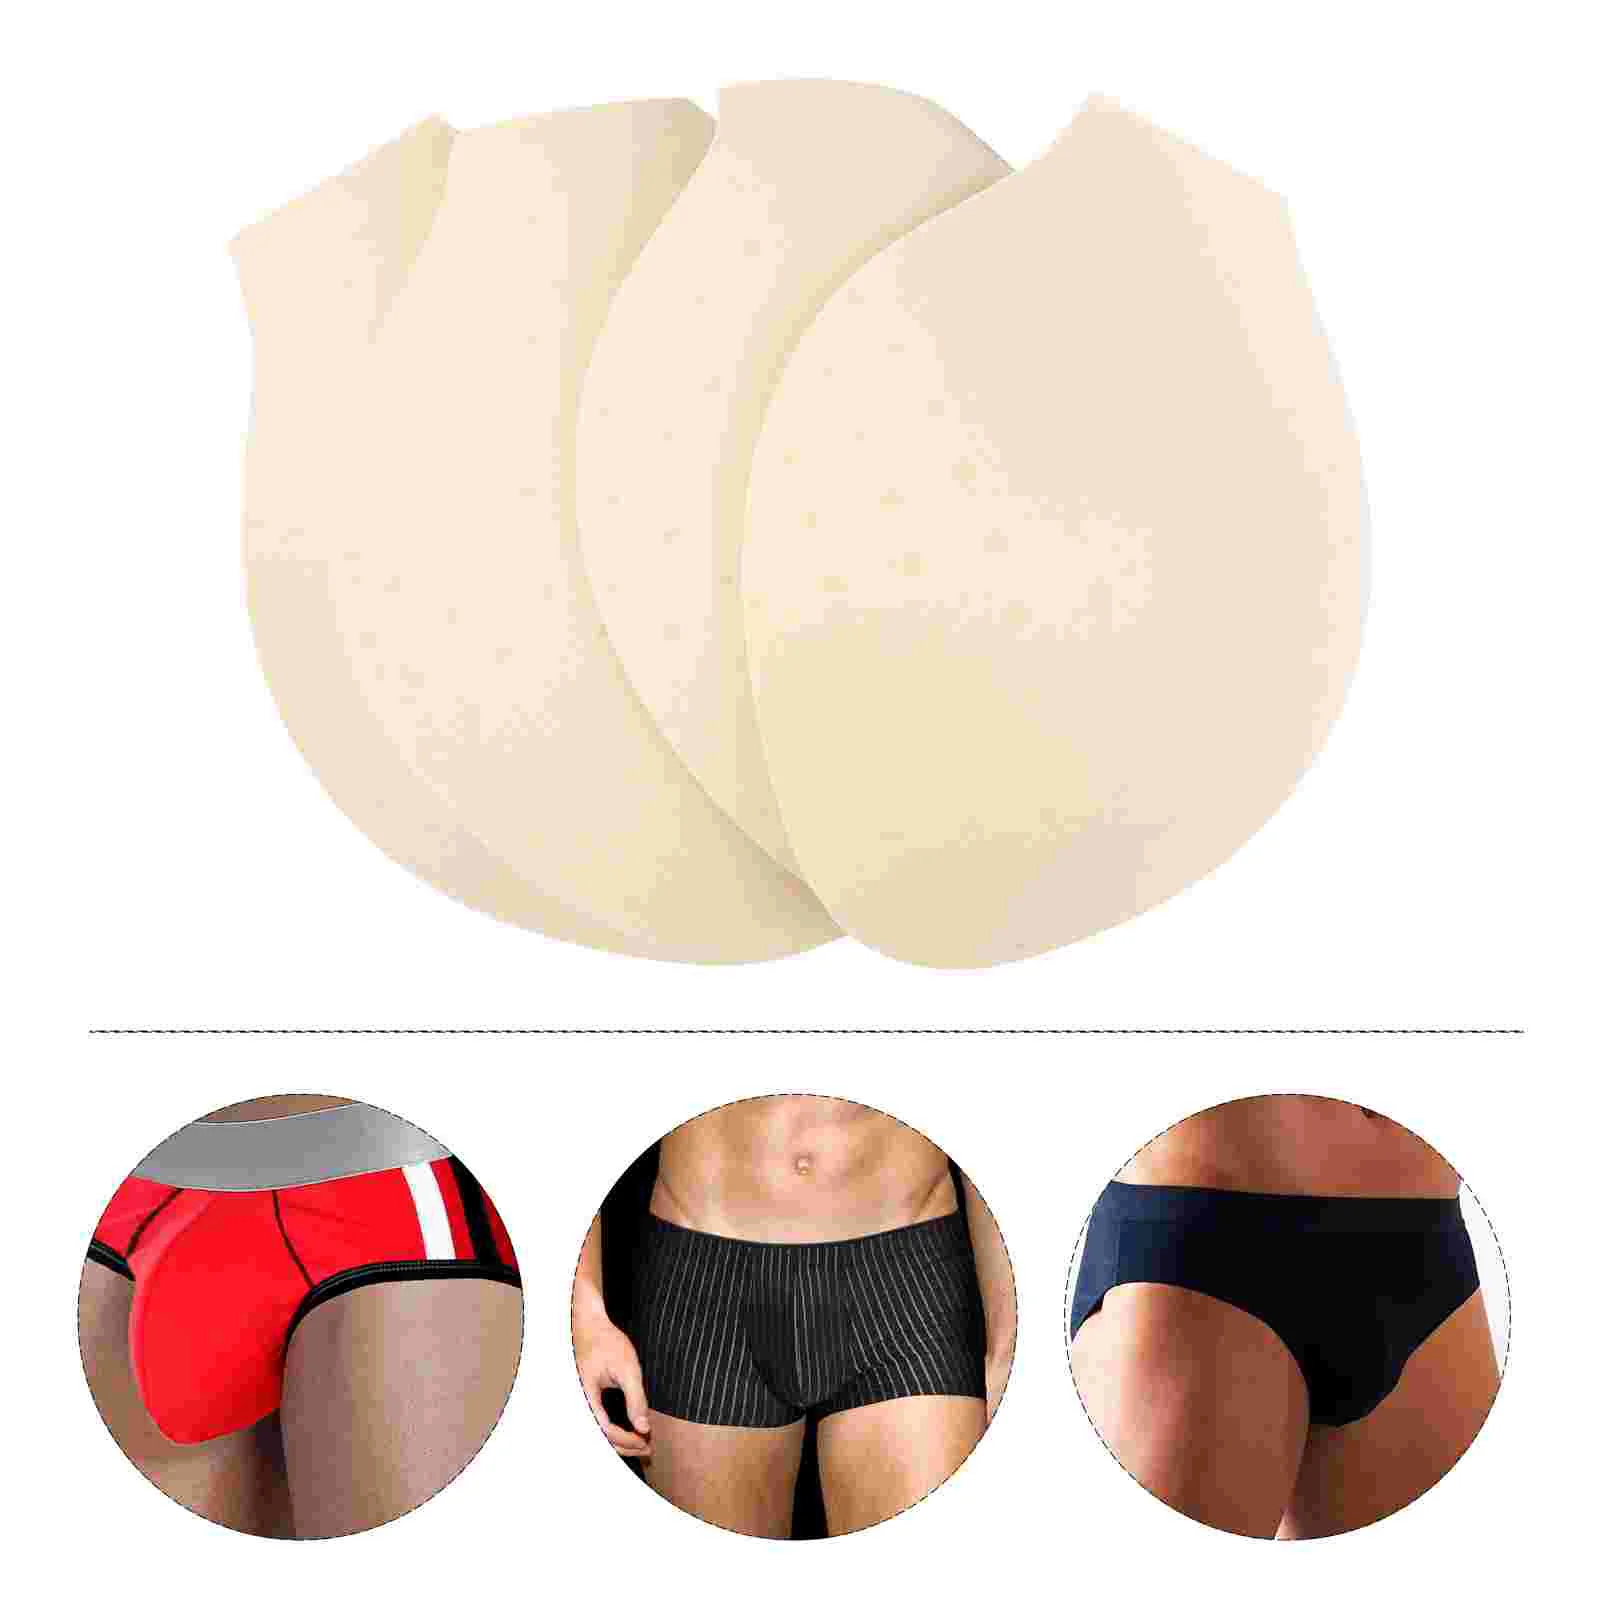 

4 Pcs Men's Panty Liner Cup Pouch Pad Swimwear Athletic Works Sports Shorts Enlarge Coaster